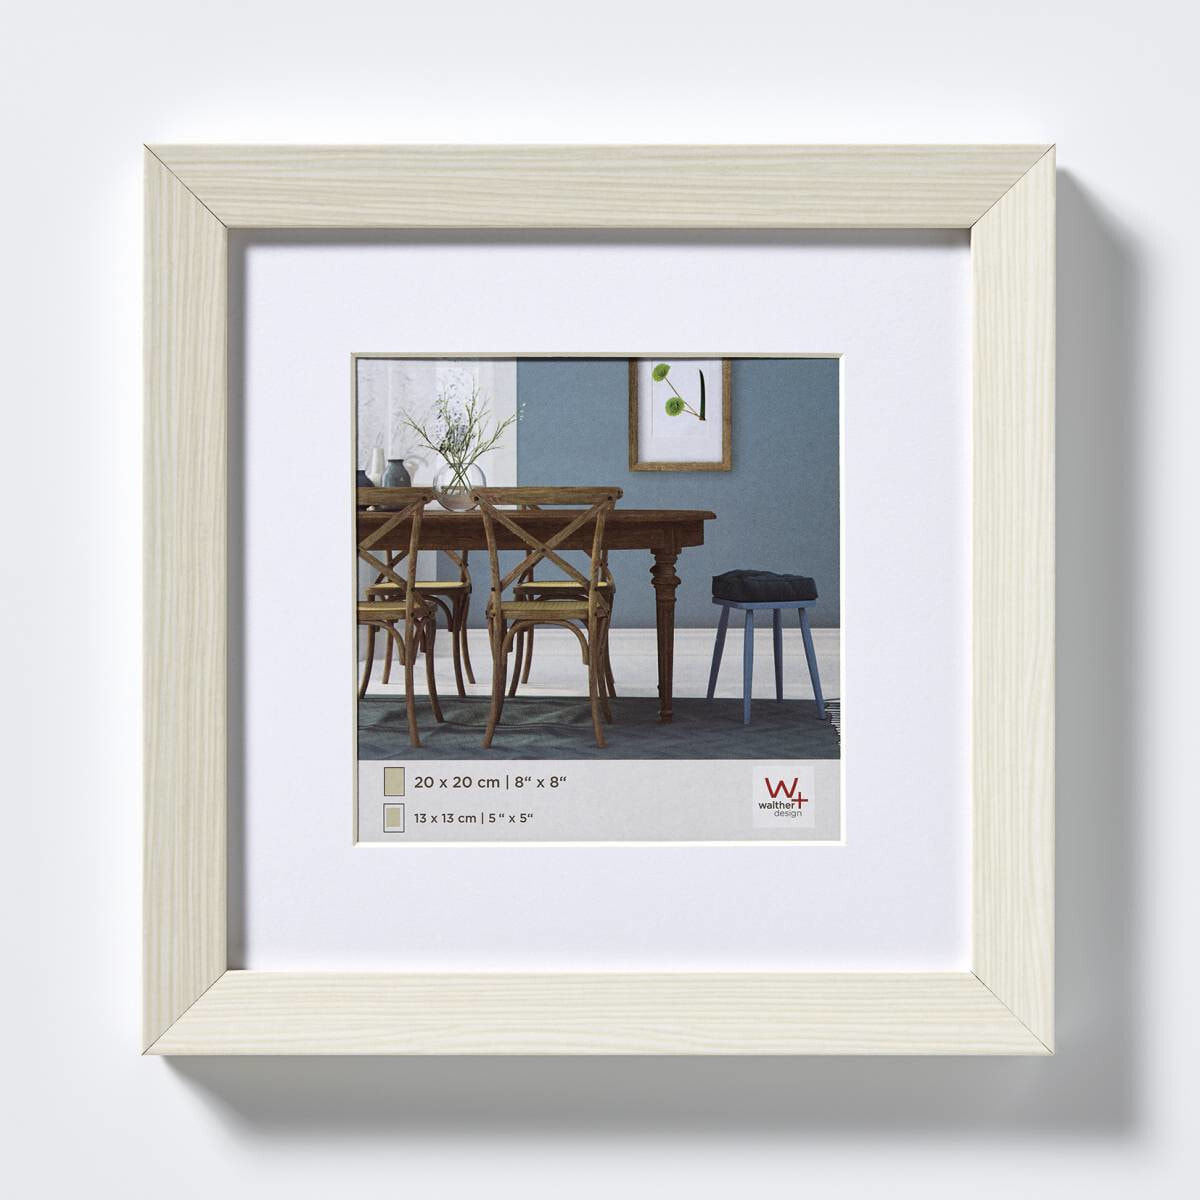 walther design EF330W - Wood - White - Single picture frame - 18 x 18 cm - Rectangular - Germany